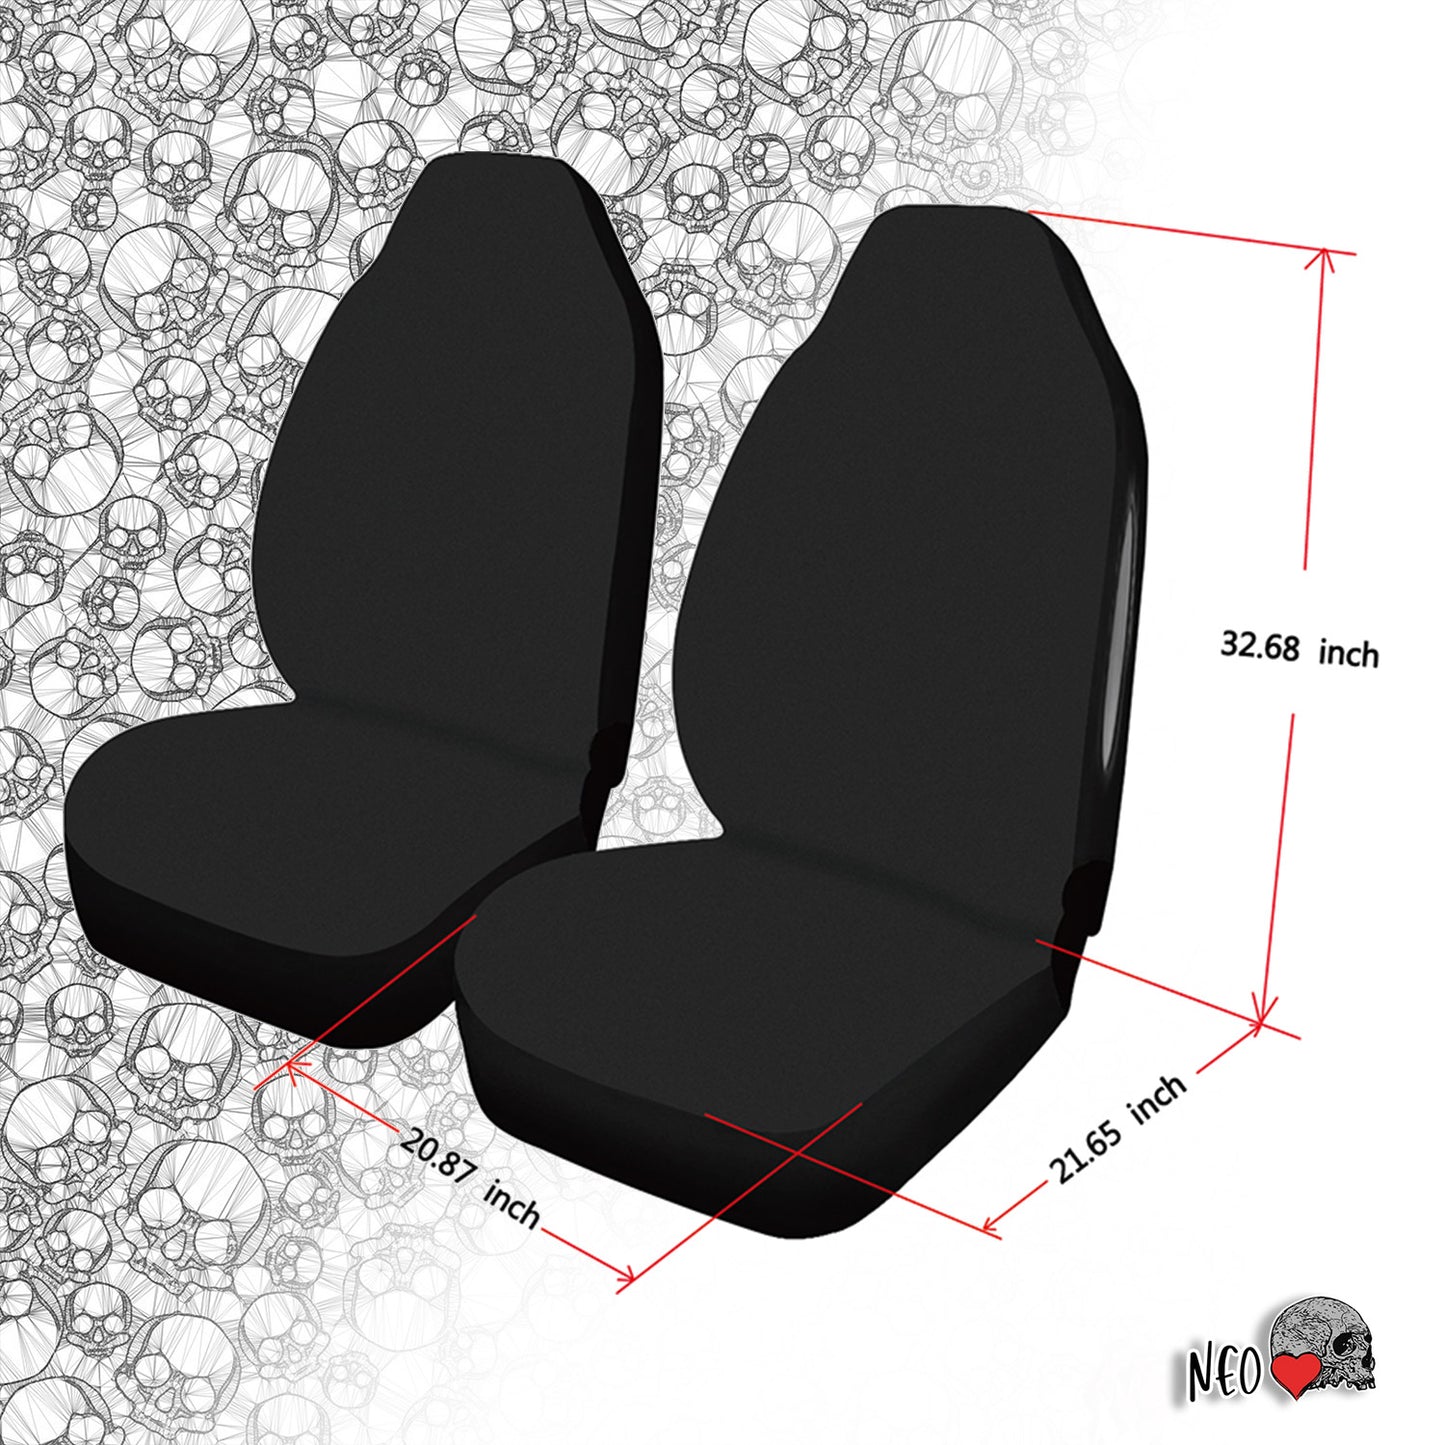 Cyber Brain Car Seat Cover Airbag Compatible (Set of 2) - NeoSkull